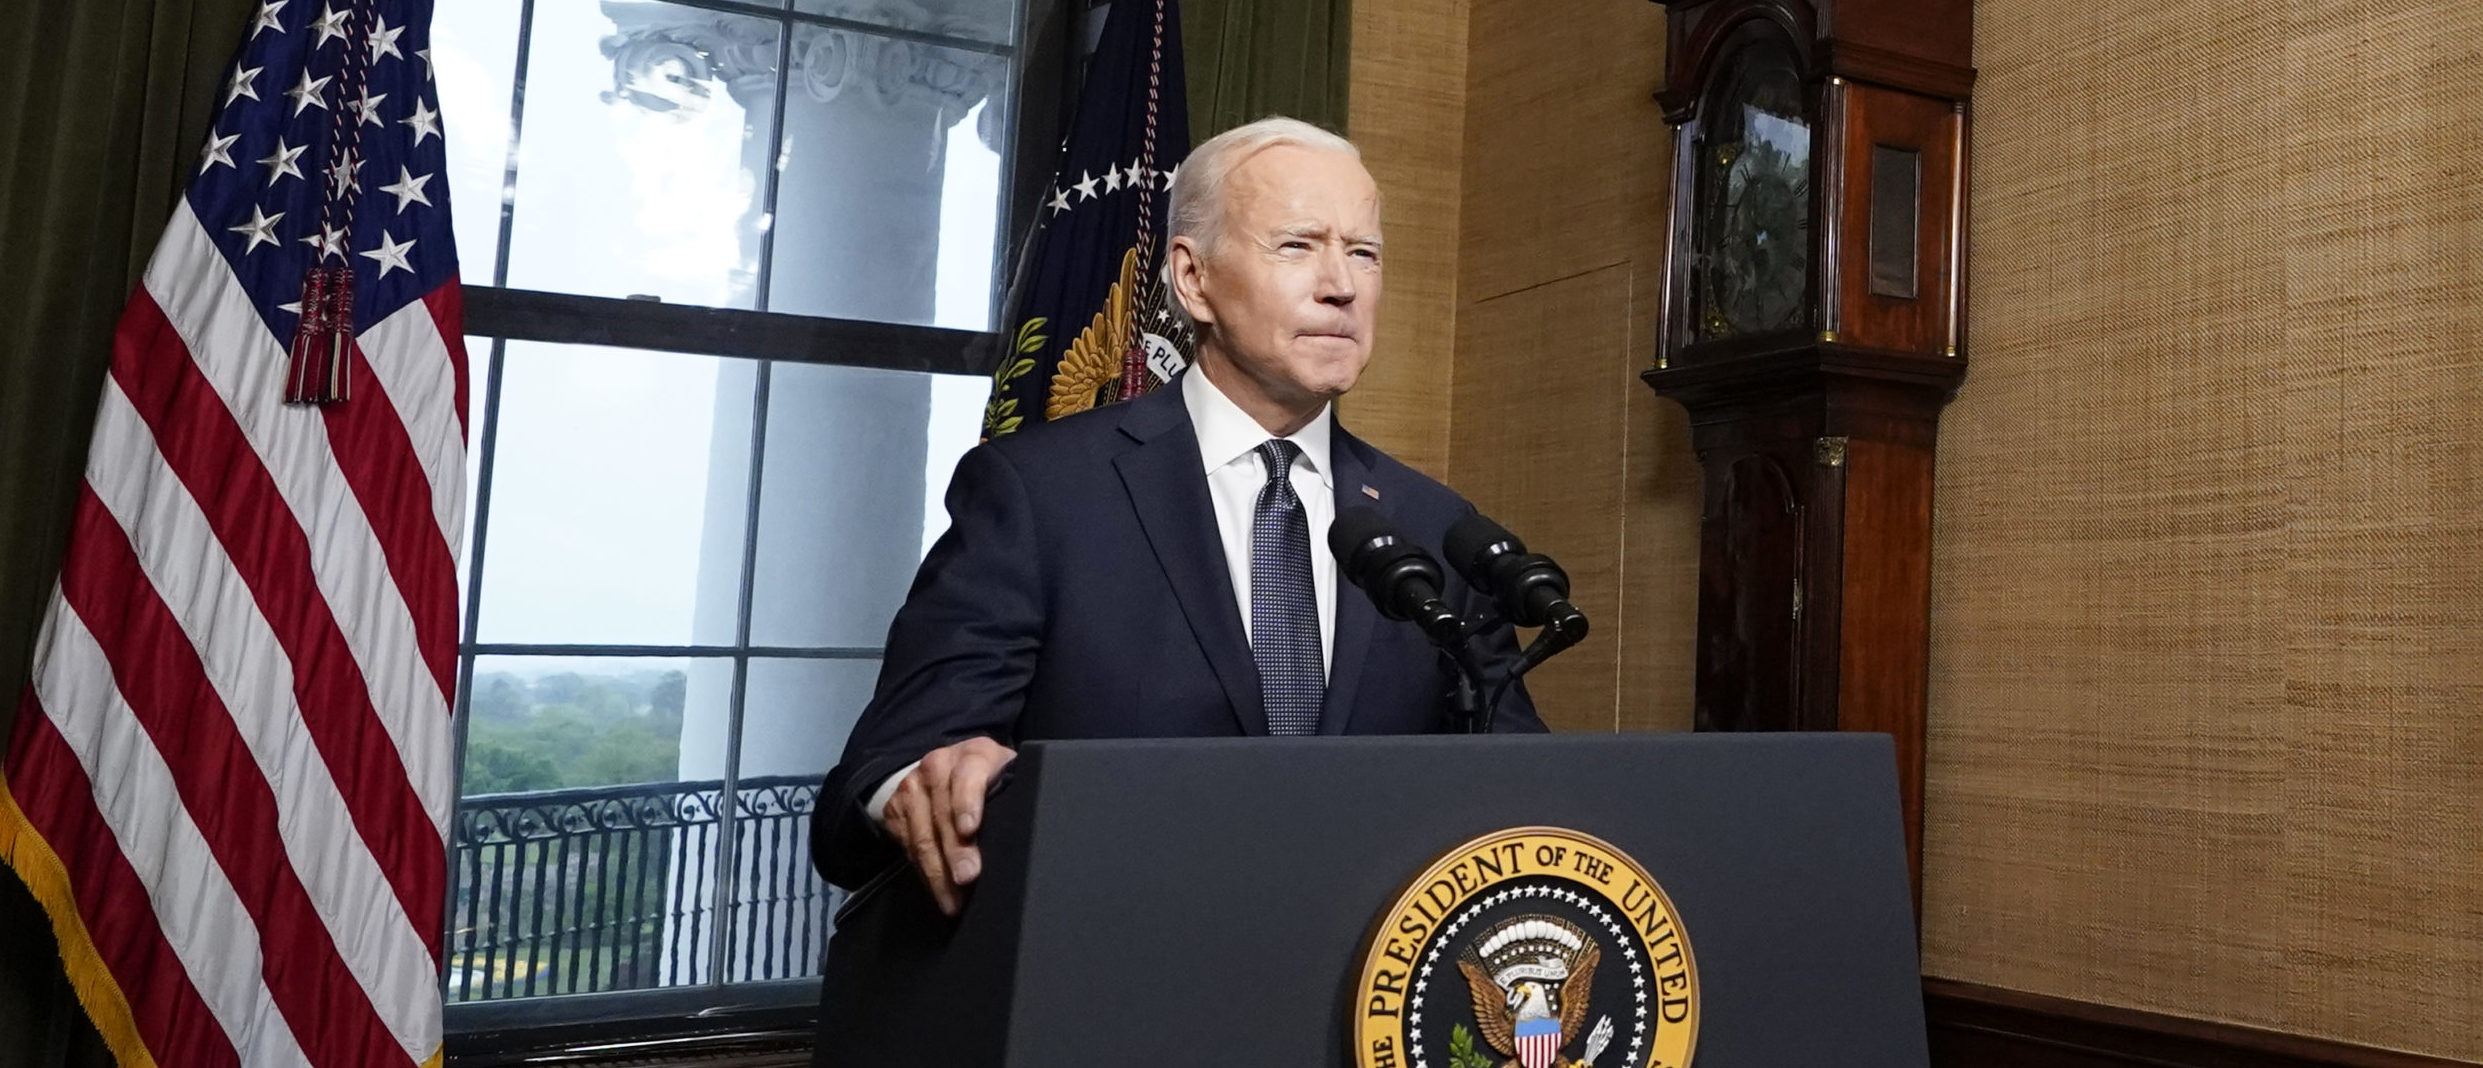 WASHINGTON, DC - APRIL 14: U.S. President Joe Biden speaks from the Treaty Room in the White House about the withdrawal of U.S. troops from Afghanistan on April 14, 2021 in Washington, DC. President Biden announced his plans to pull all remaining U.S. troops out of Afghanistan by September 11, 2021 in a final step towards ending America’s longest war. (Photo by Andrew Harnik-Pool/Getty Images)